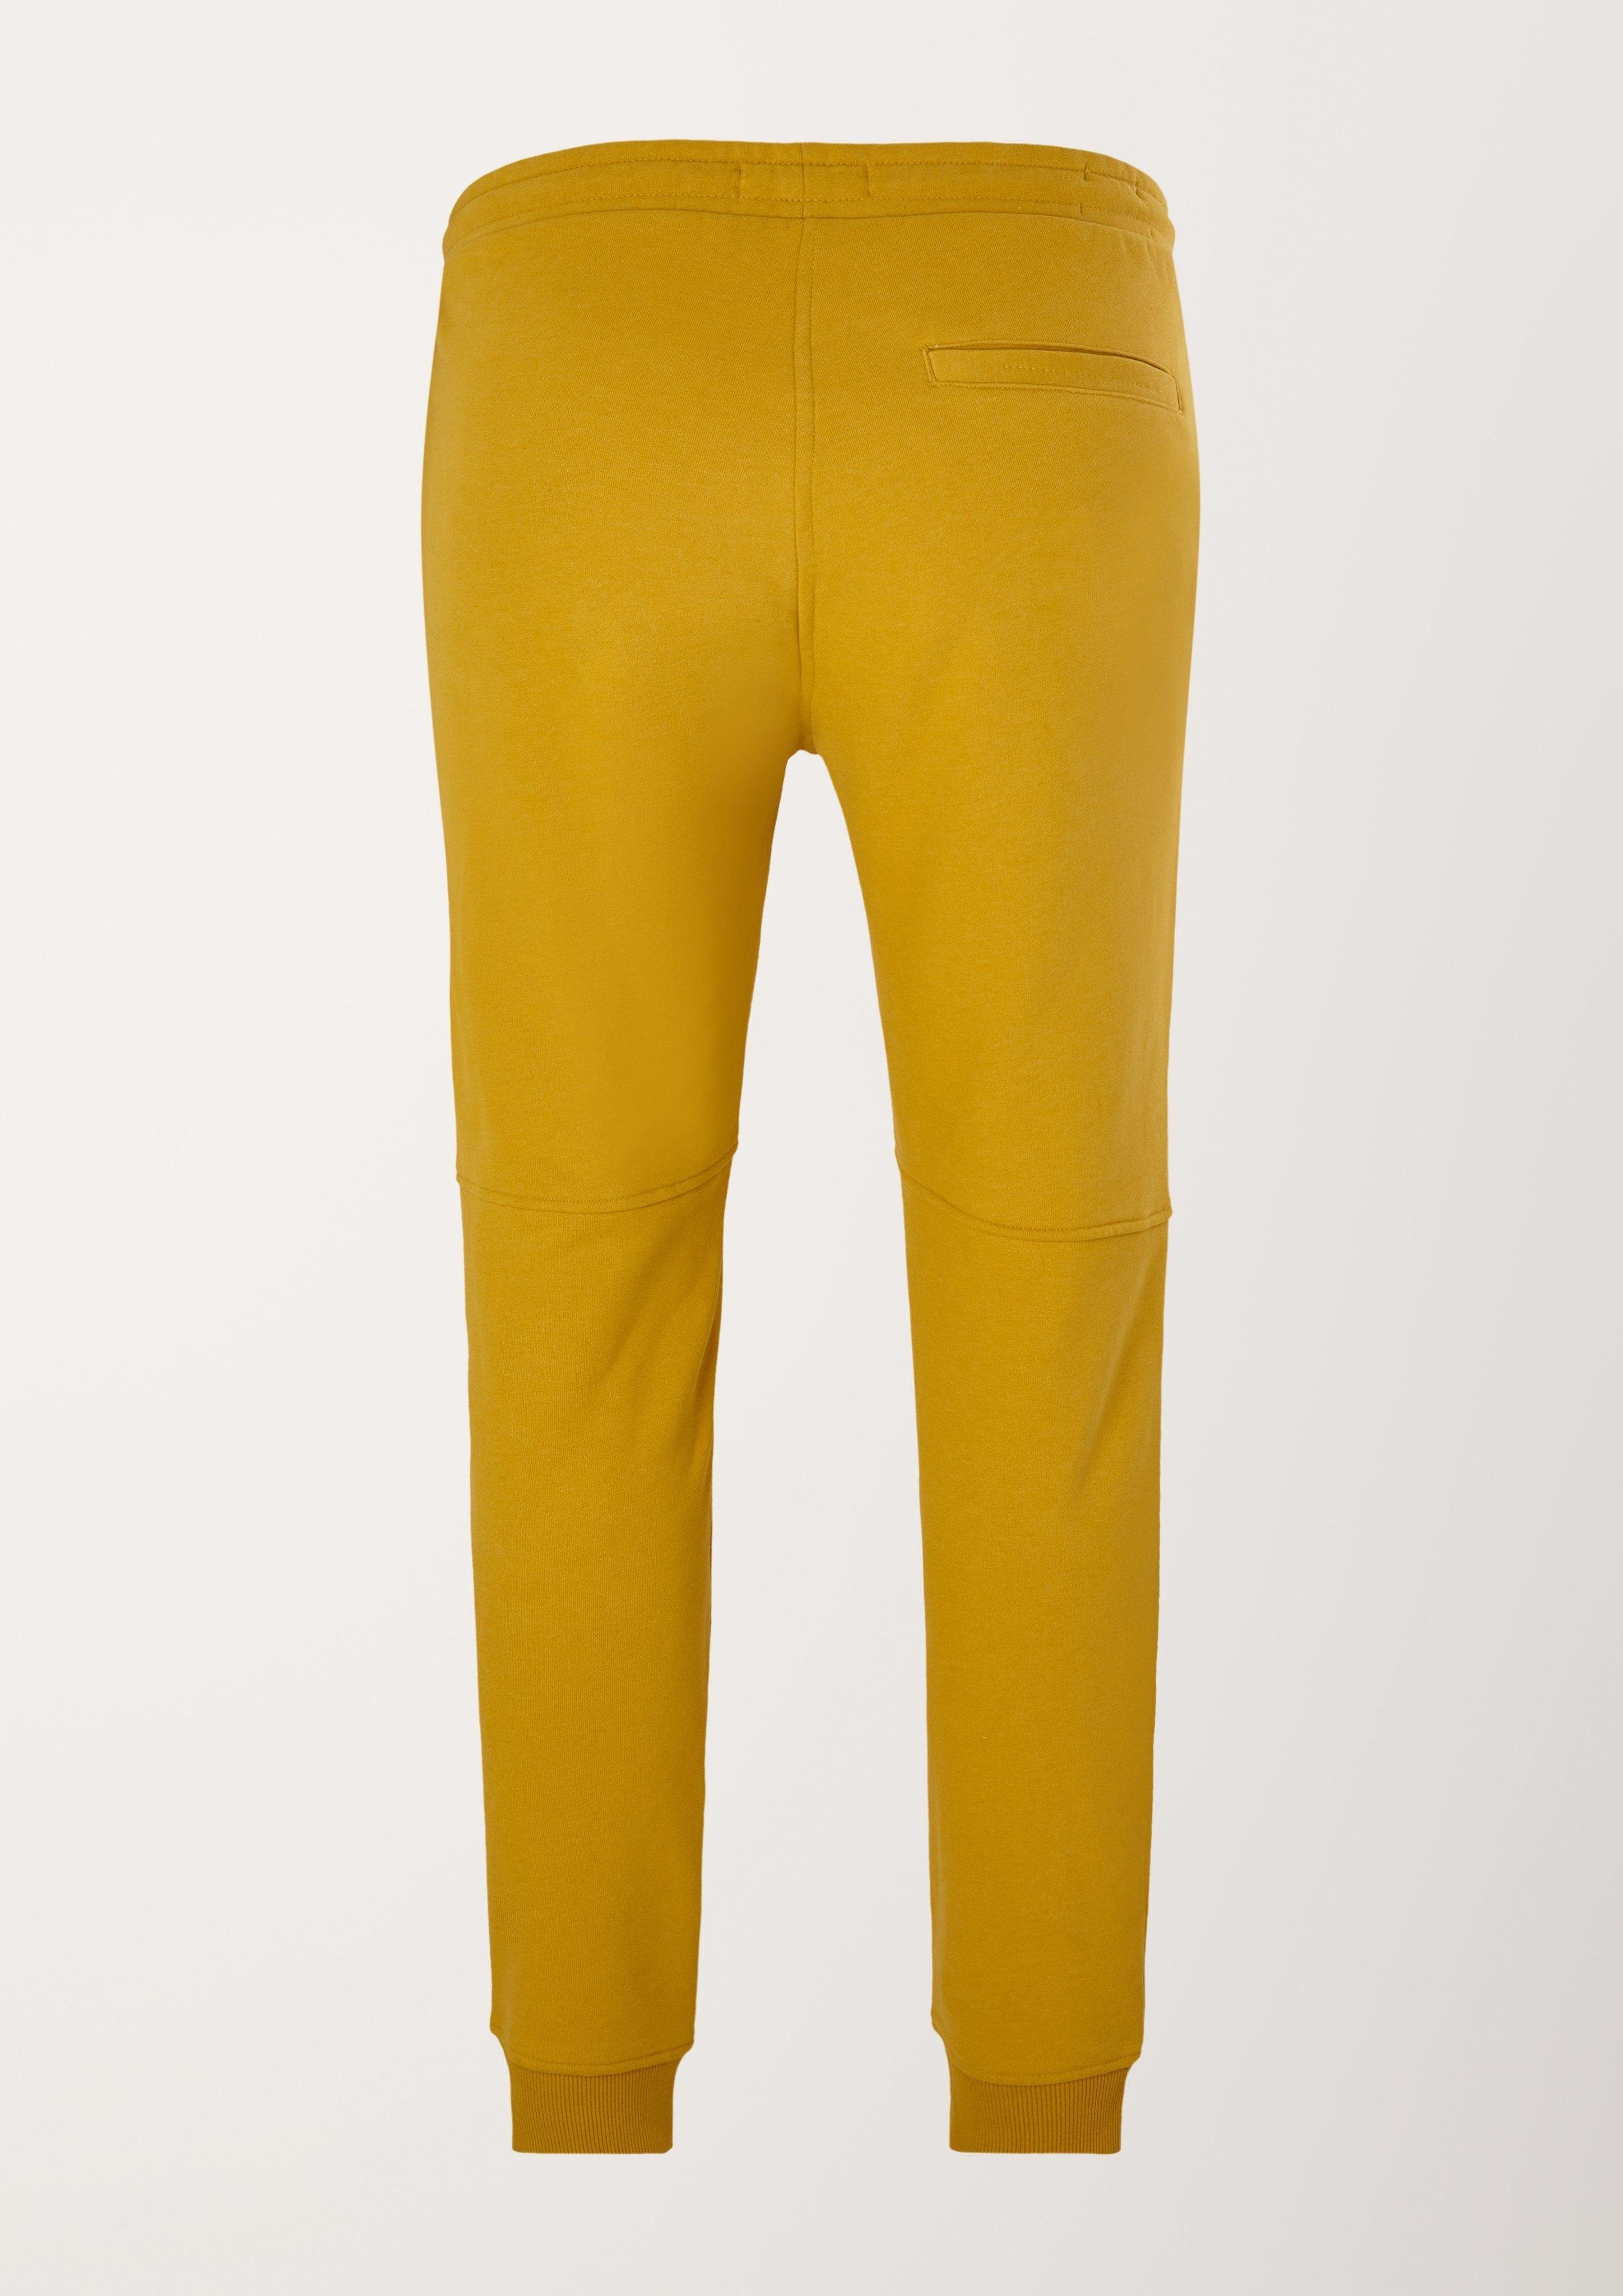 Jogger Relaxed: s.Oliver yellow aus Sweat Stoffhose Rippbündchen